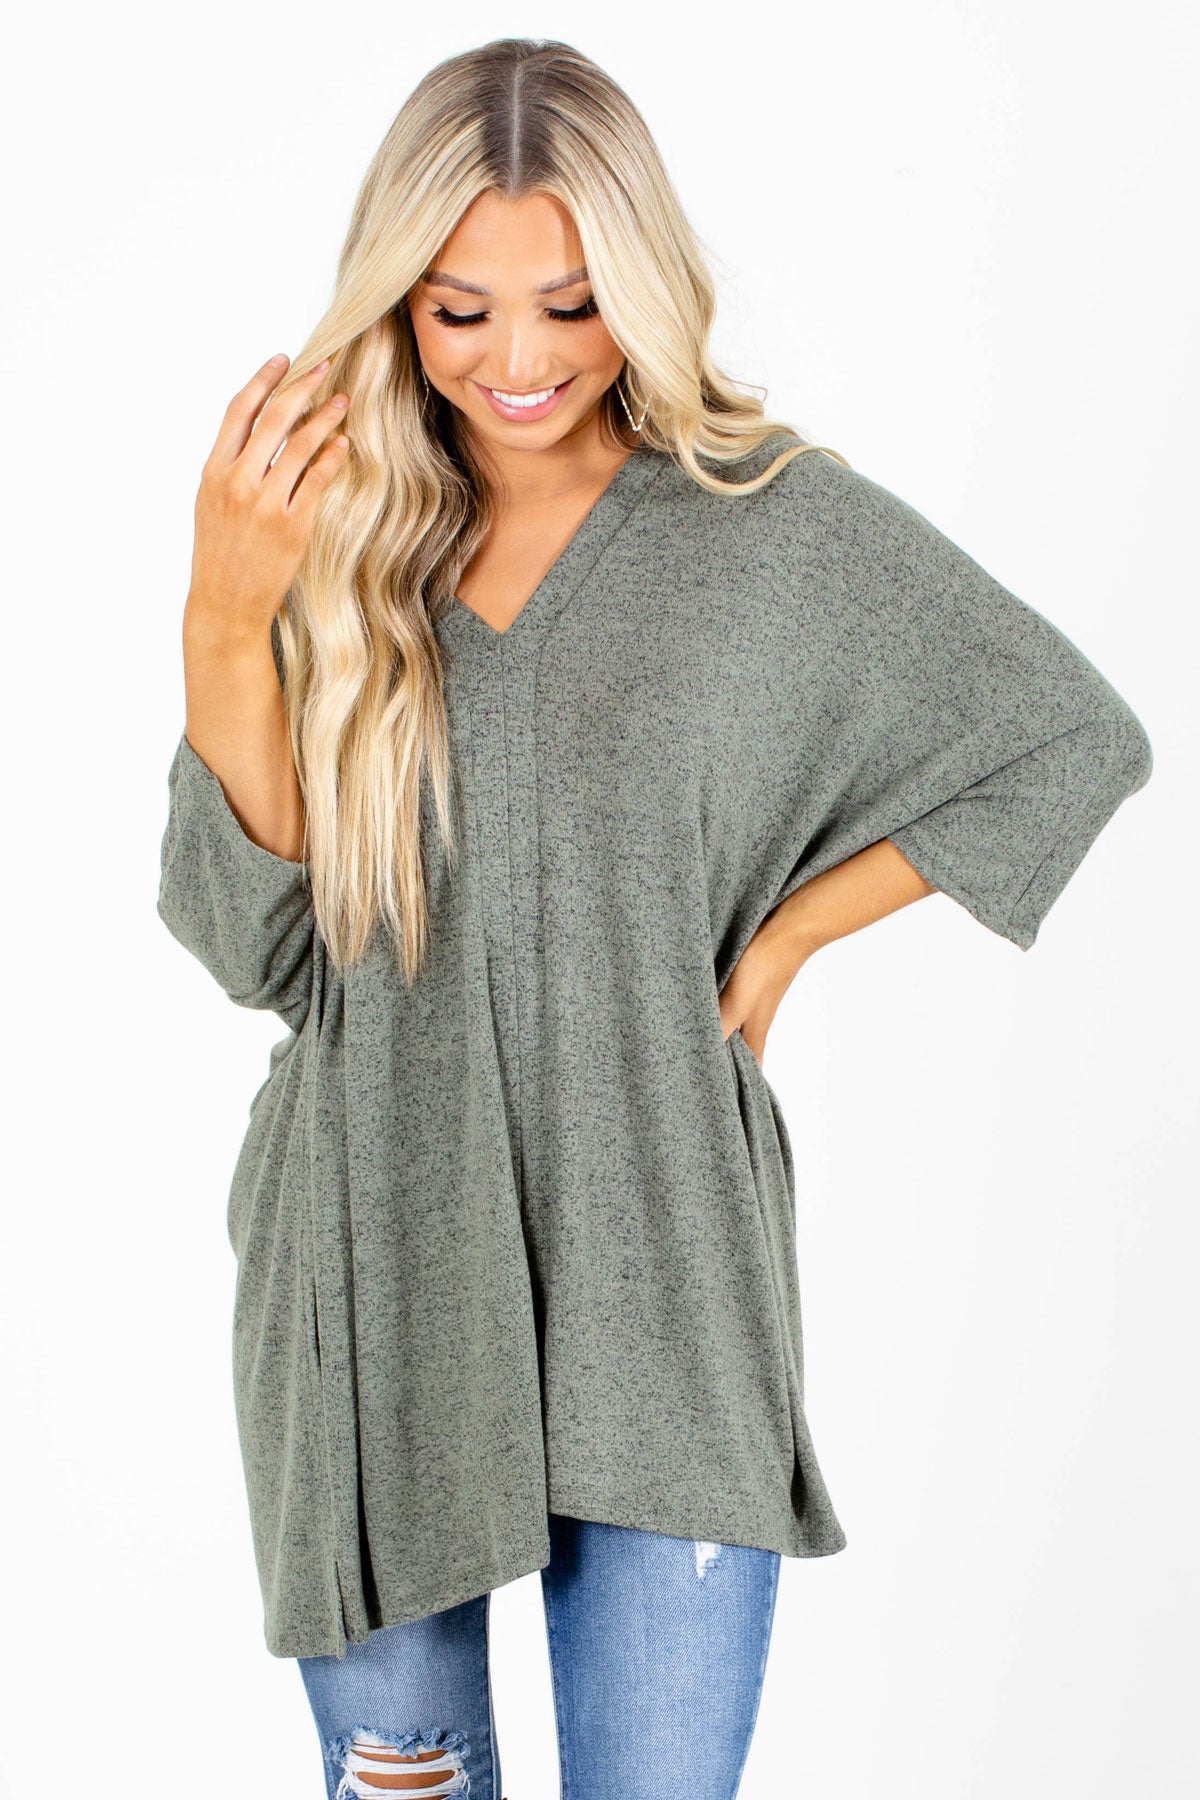 Heather Light Sage Poncho Top For Women